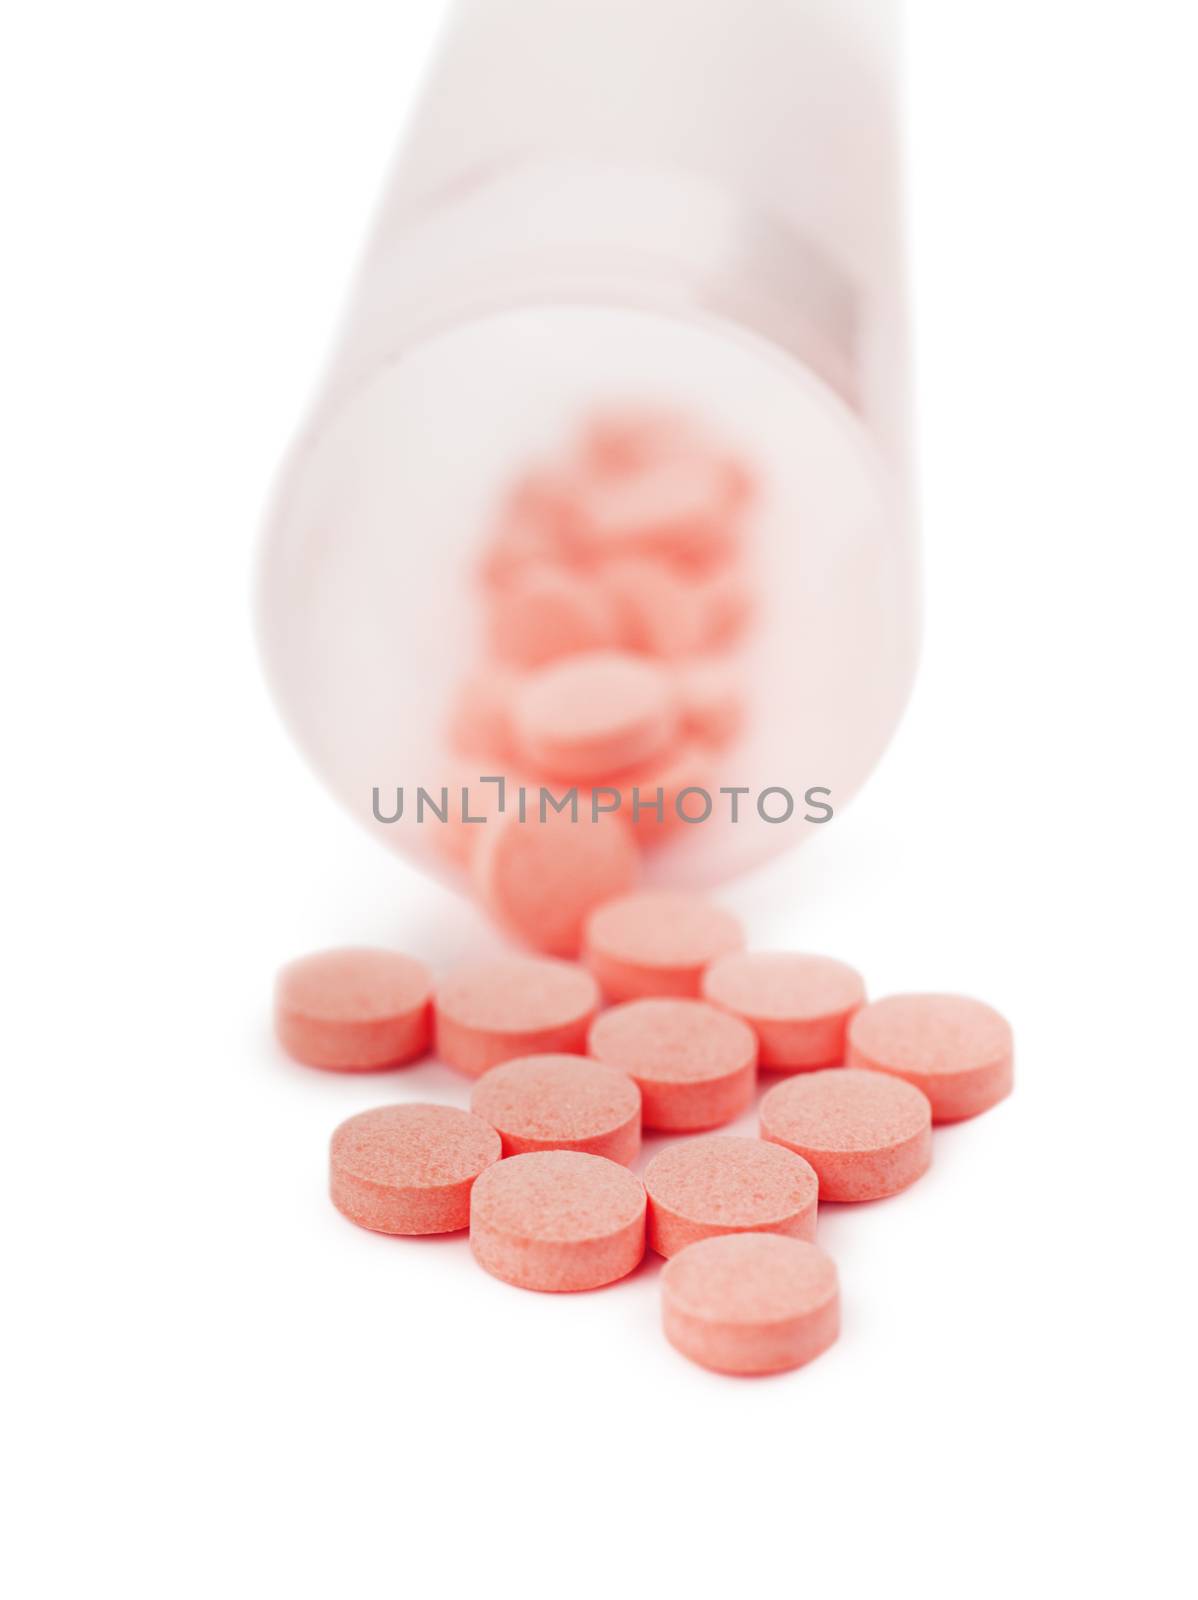 Macro view of heap of red pills spilled out of container over white background